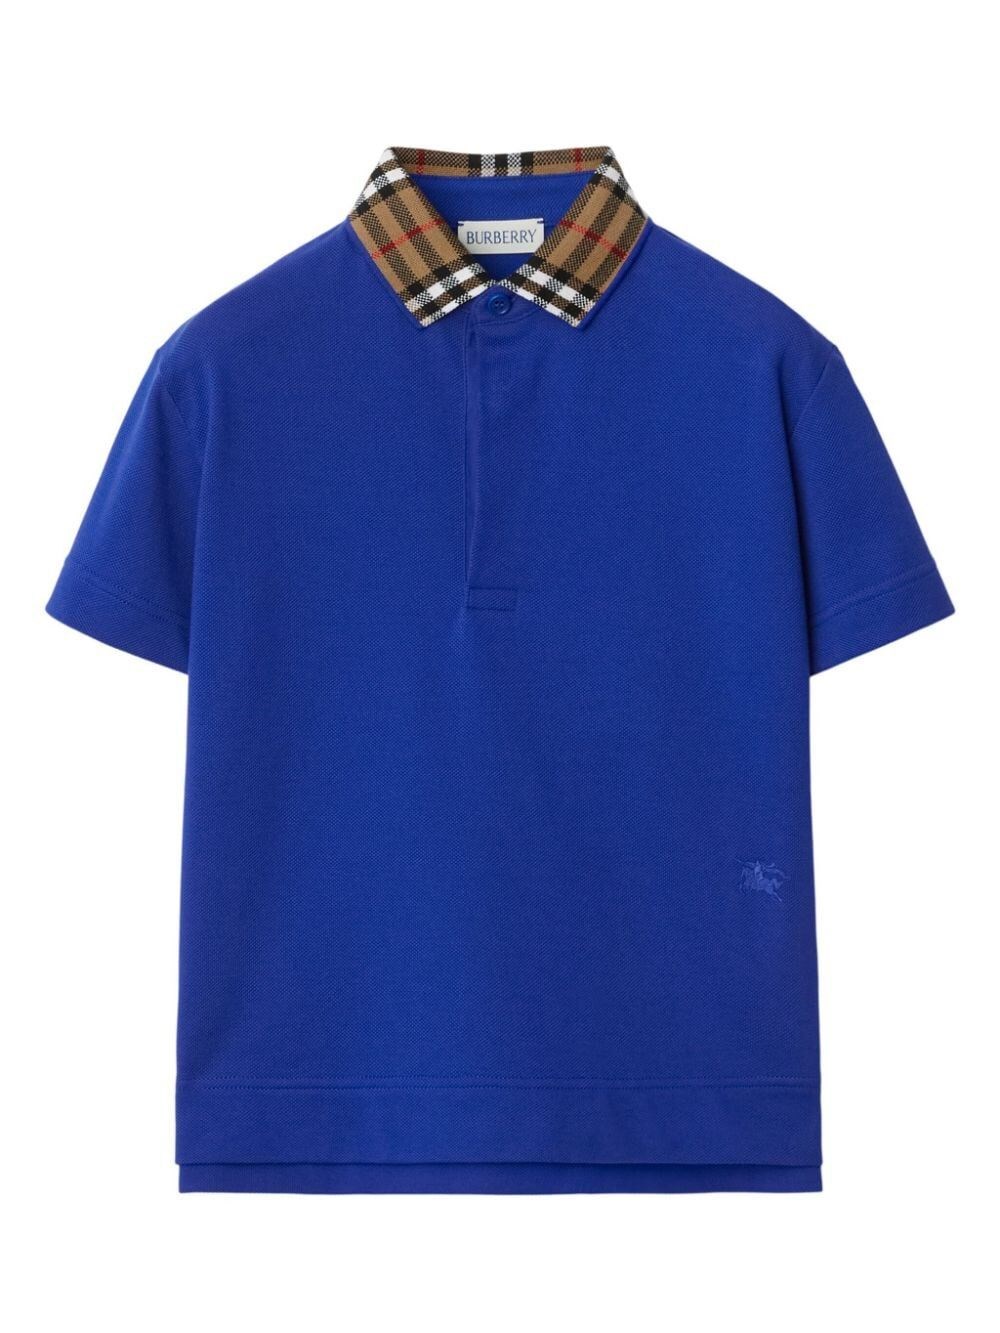 Burberry Kids' Check Collar Polo Shirt In Blue